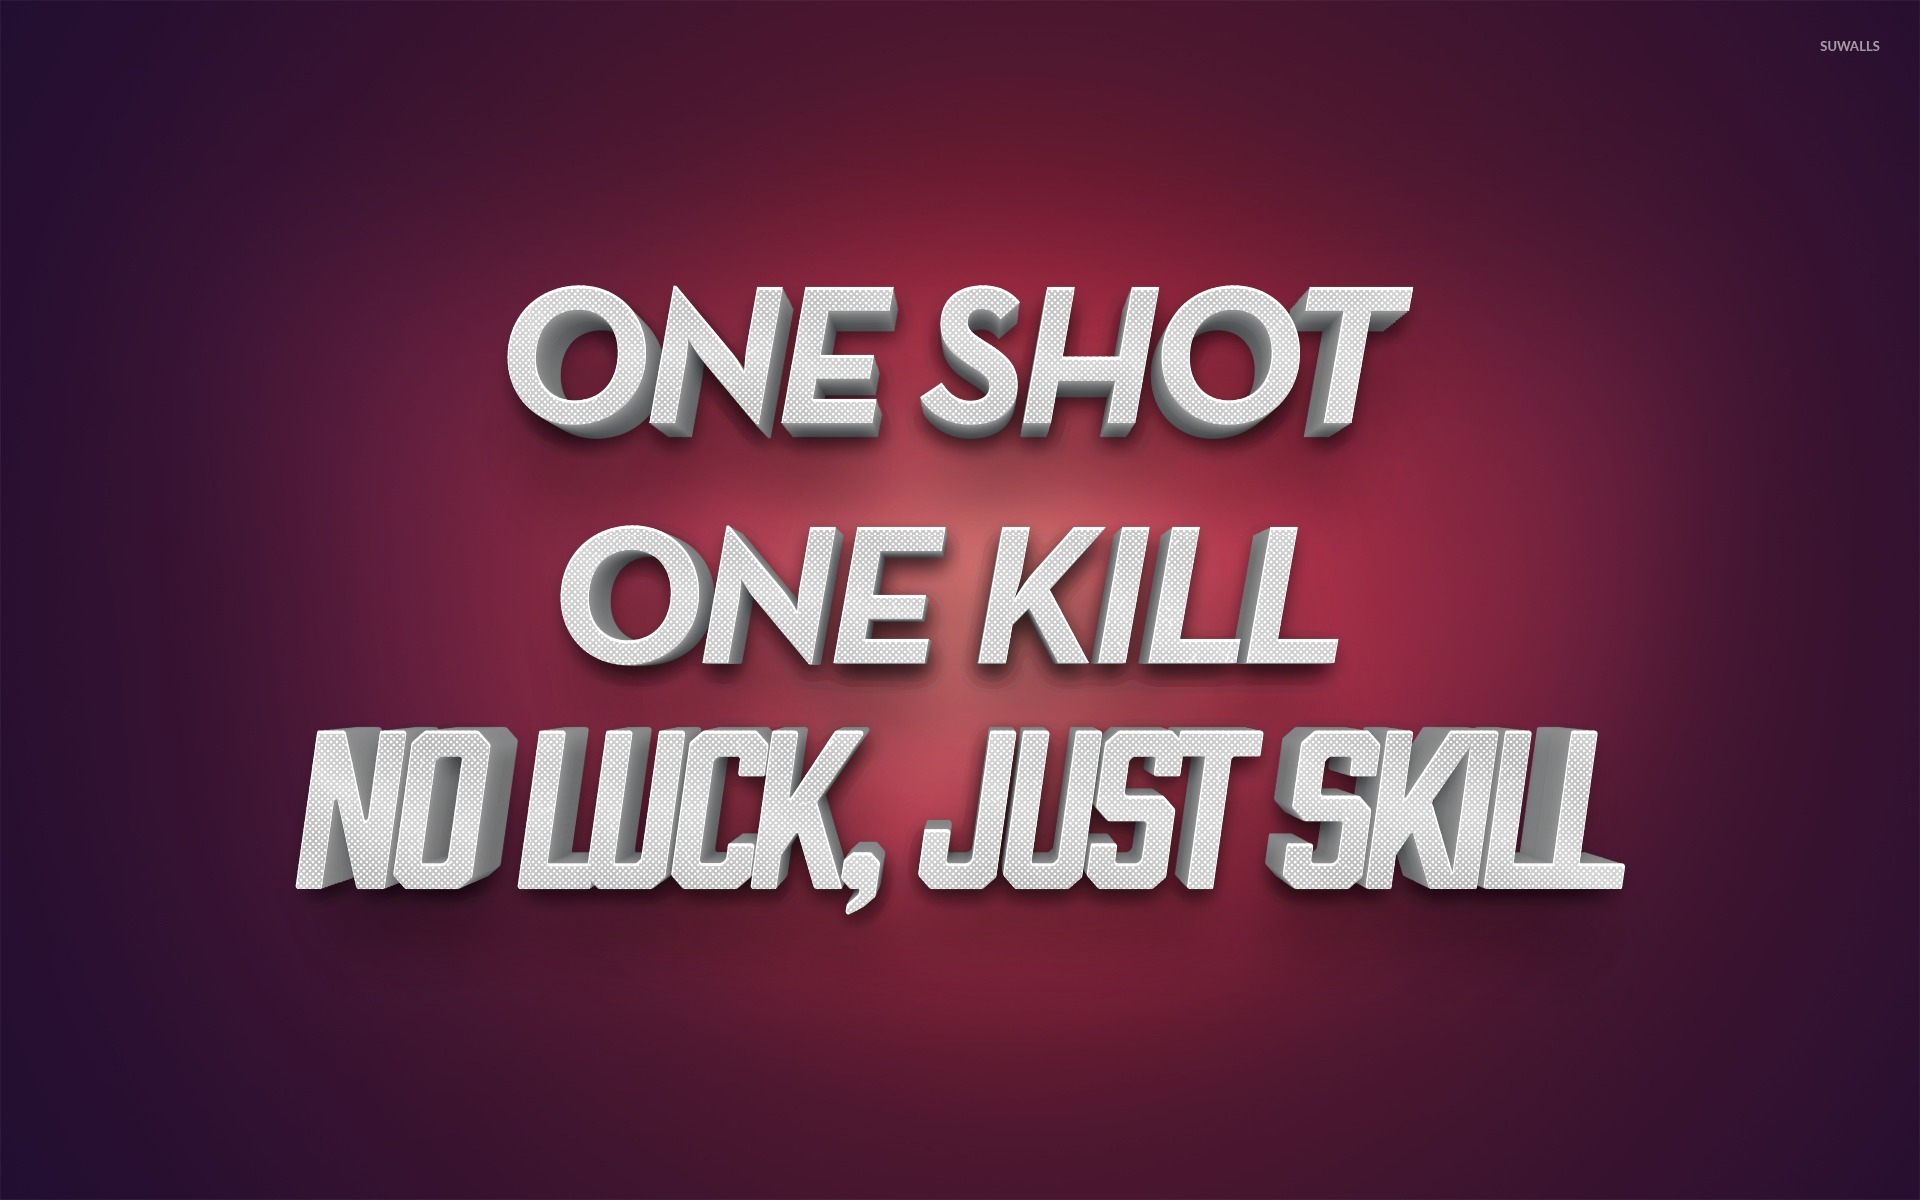 One shot, one kill wallpaper - Typography wallpapers - #35568